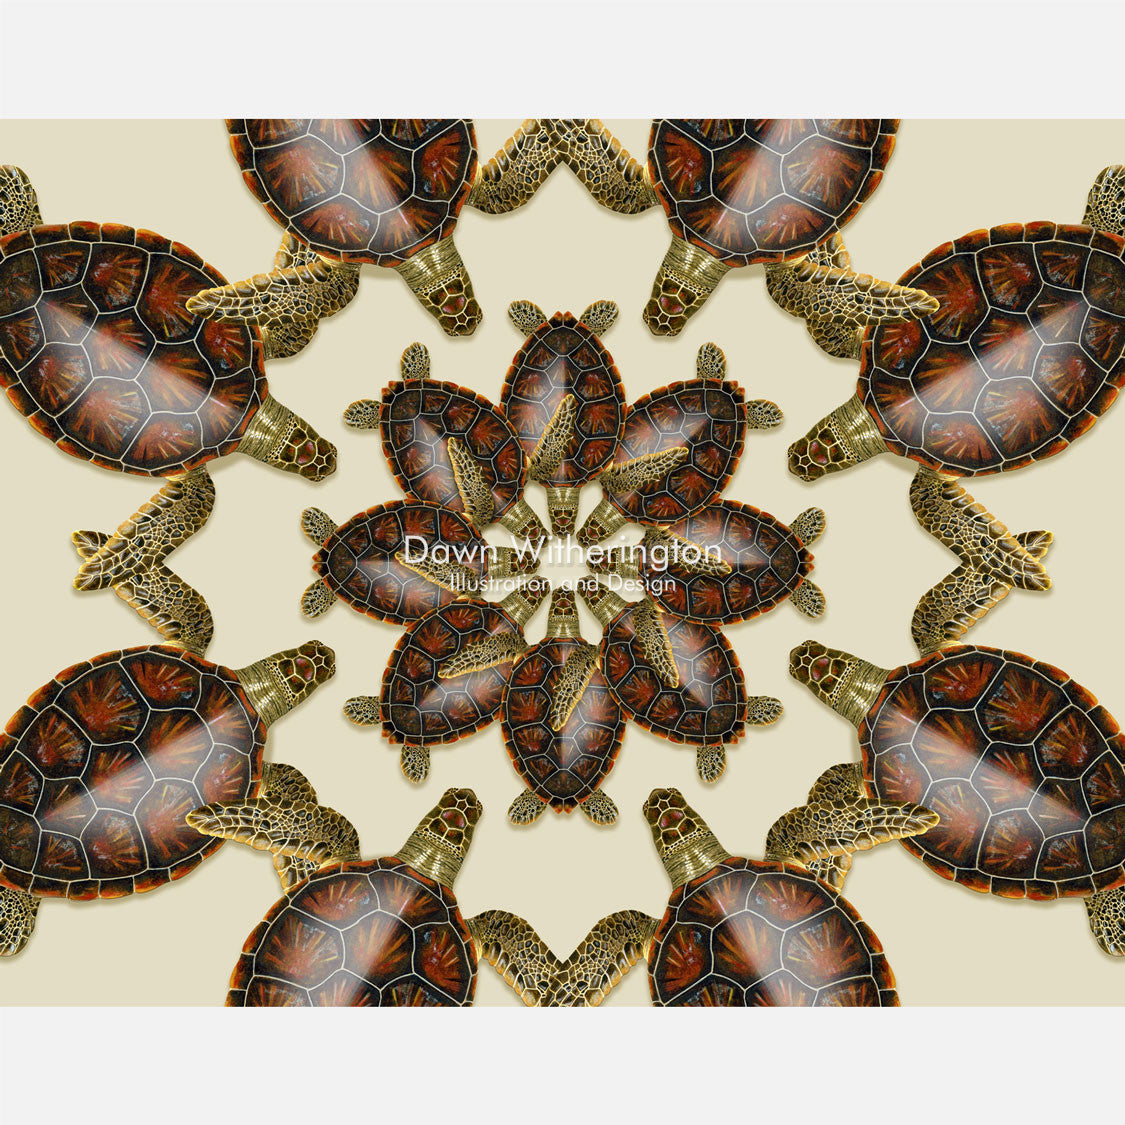 This beautiful design is of a kaleidoscopic graphic of juvenile green turtles, Chelonia midas. 